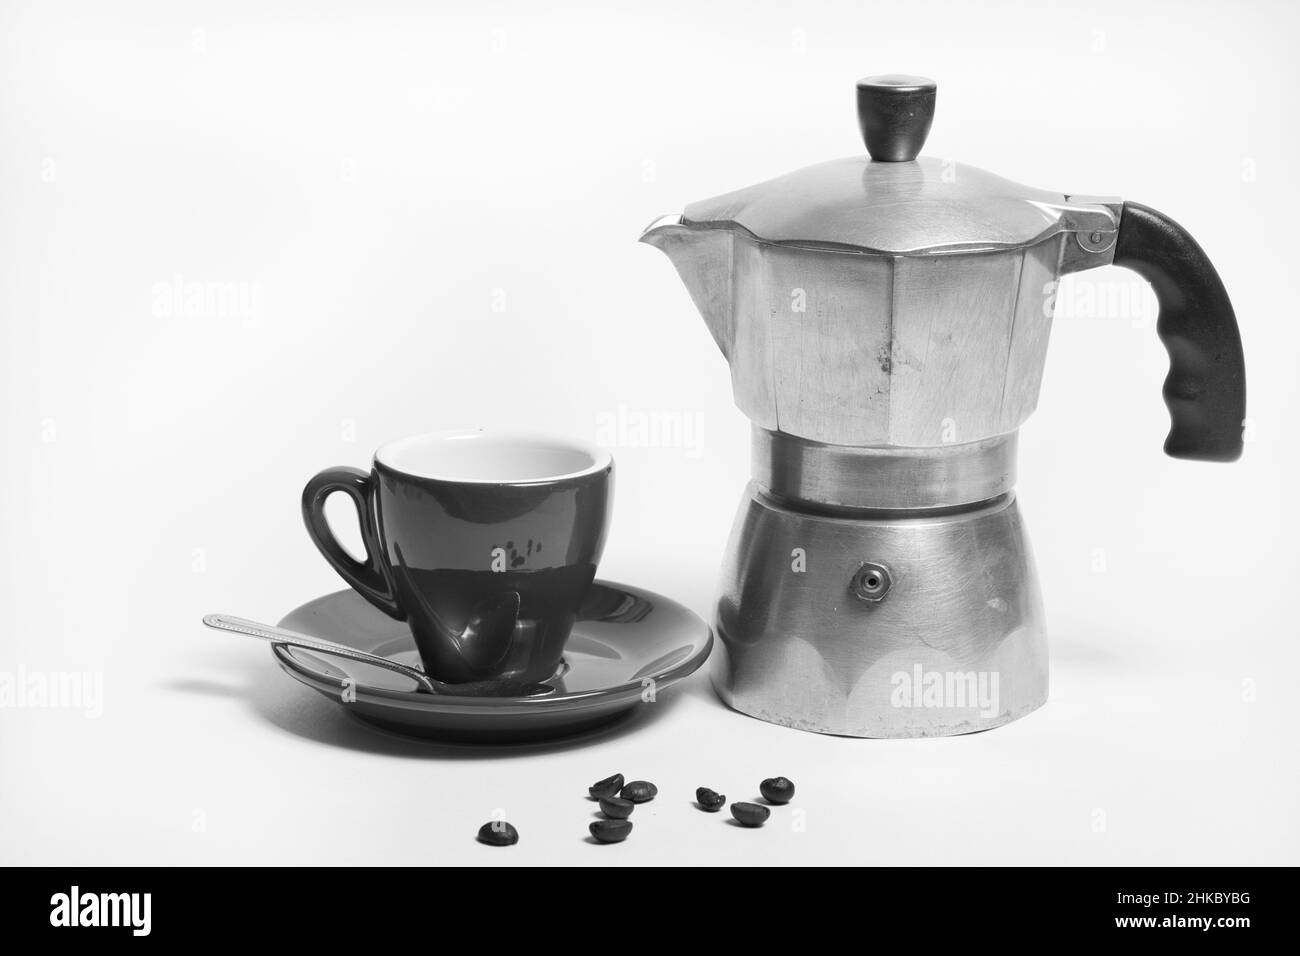 traditional espresso maker with cup and saucer Stock Photo